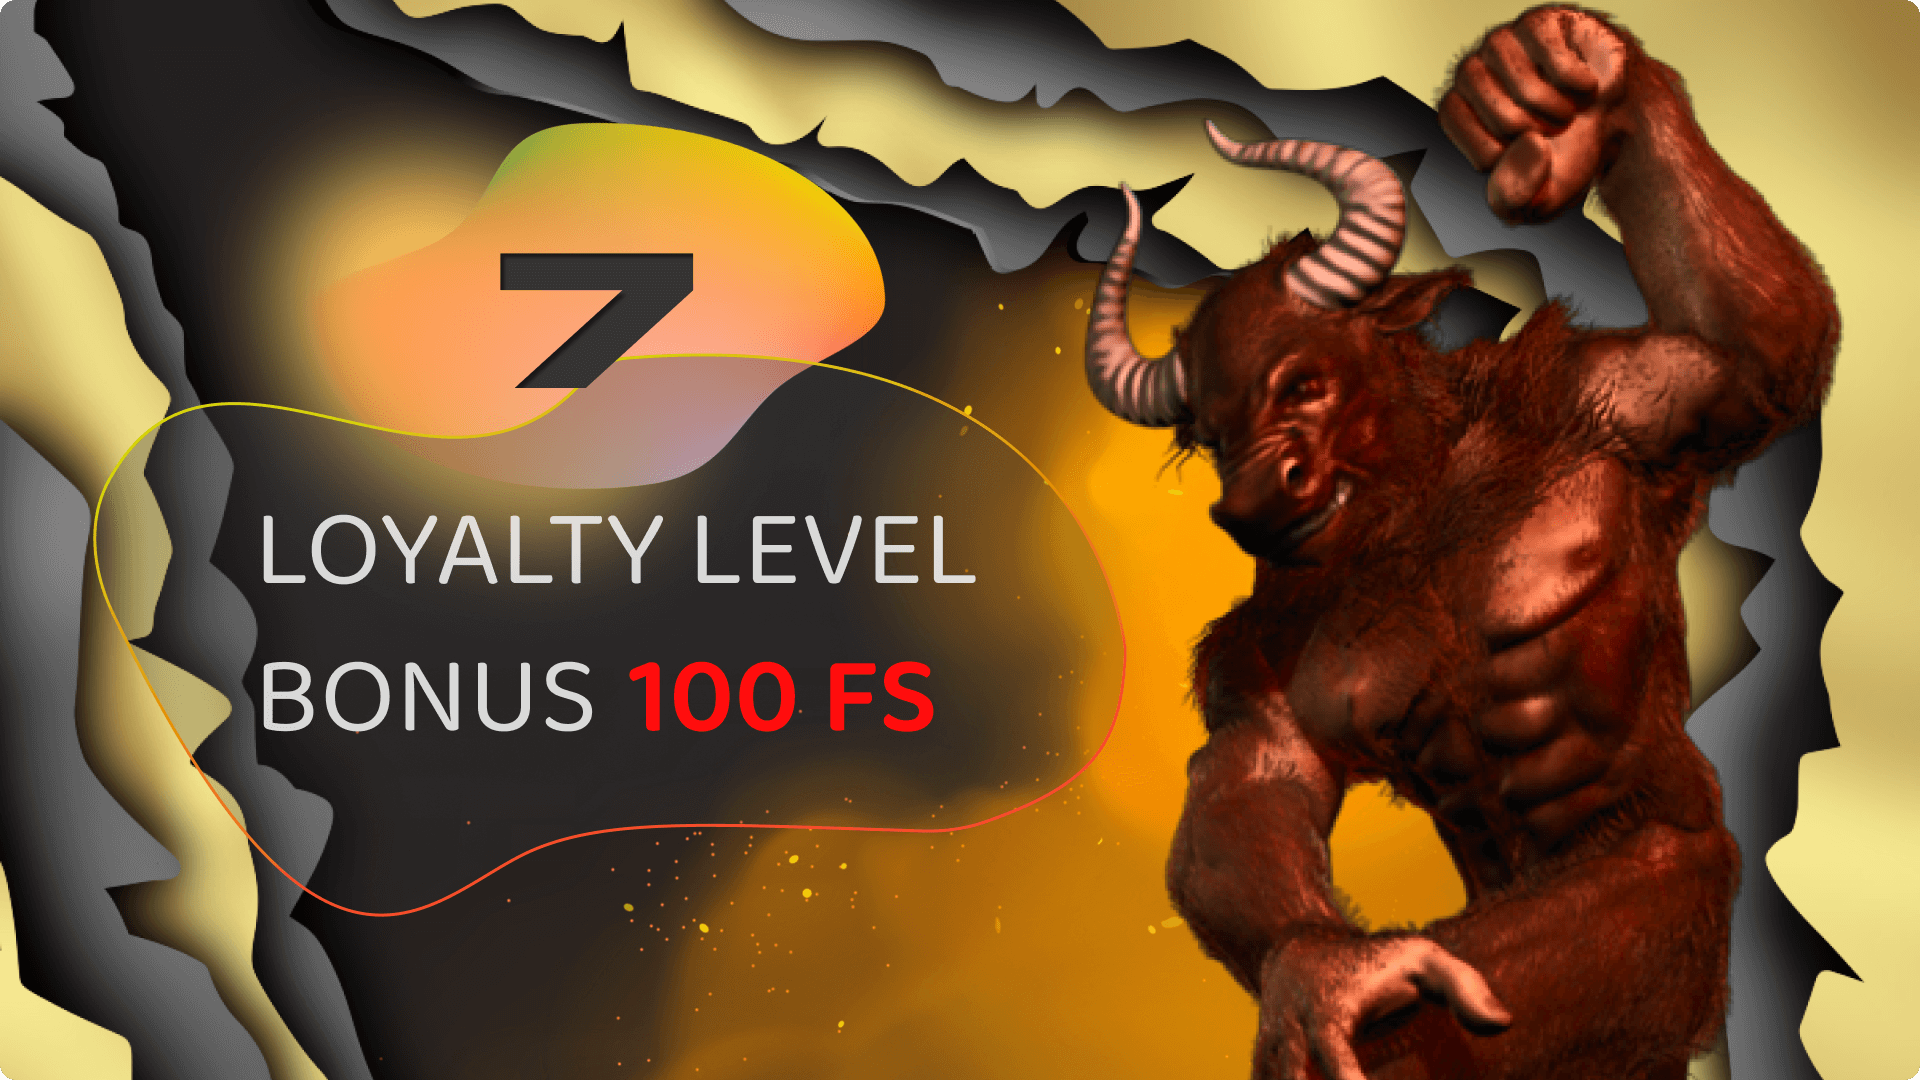 100 FS for 7 loyalty level